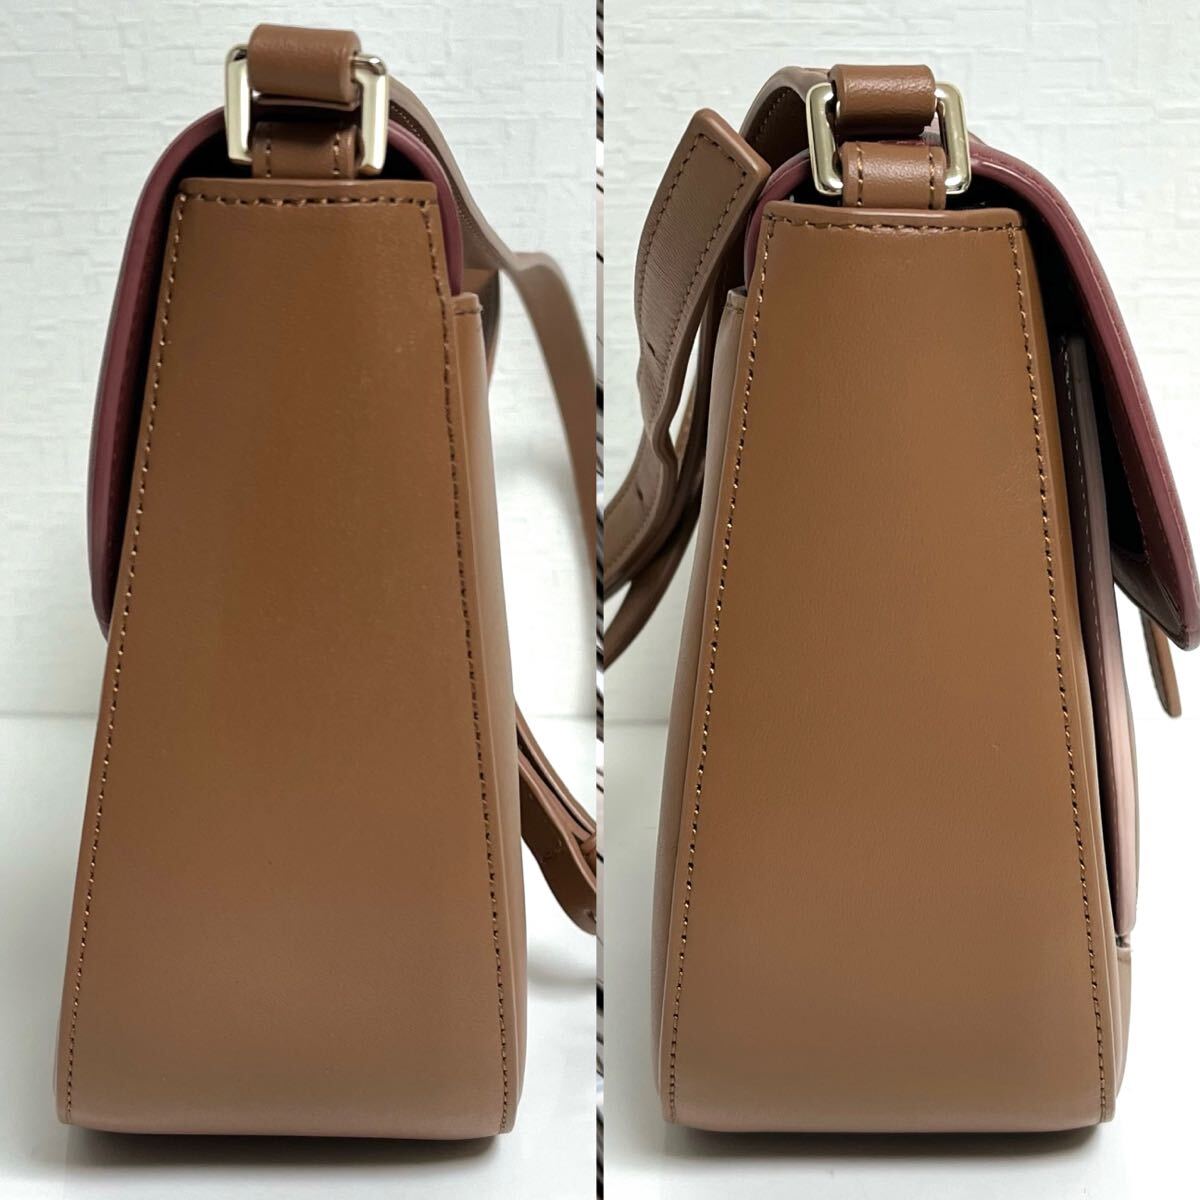 Paul Smith Paul Smith swirl in set shoulder bag leather cow leather lady's multi stripe bordeaux Brown 